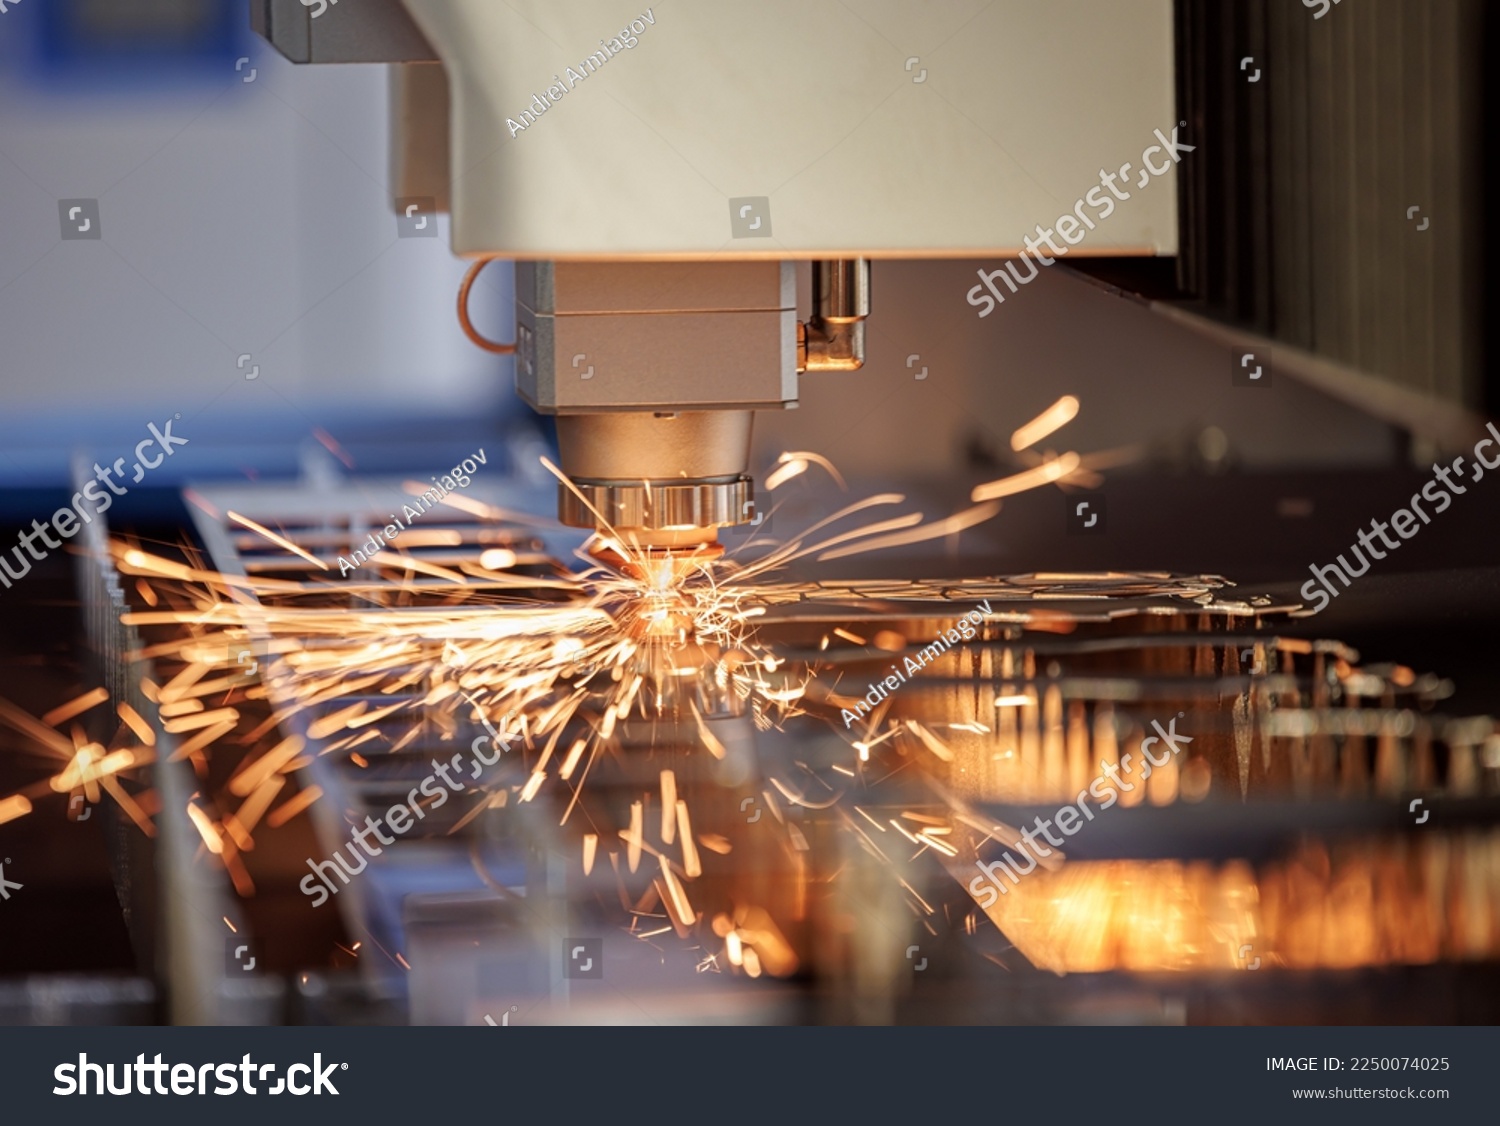 CNC Laser cutting of metal, modern industrial technology Making Industrial Details. The laser optics and CNC (computer numerical control) are used to direct the material or the laser beam generated. #2250074025